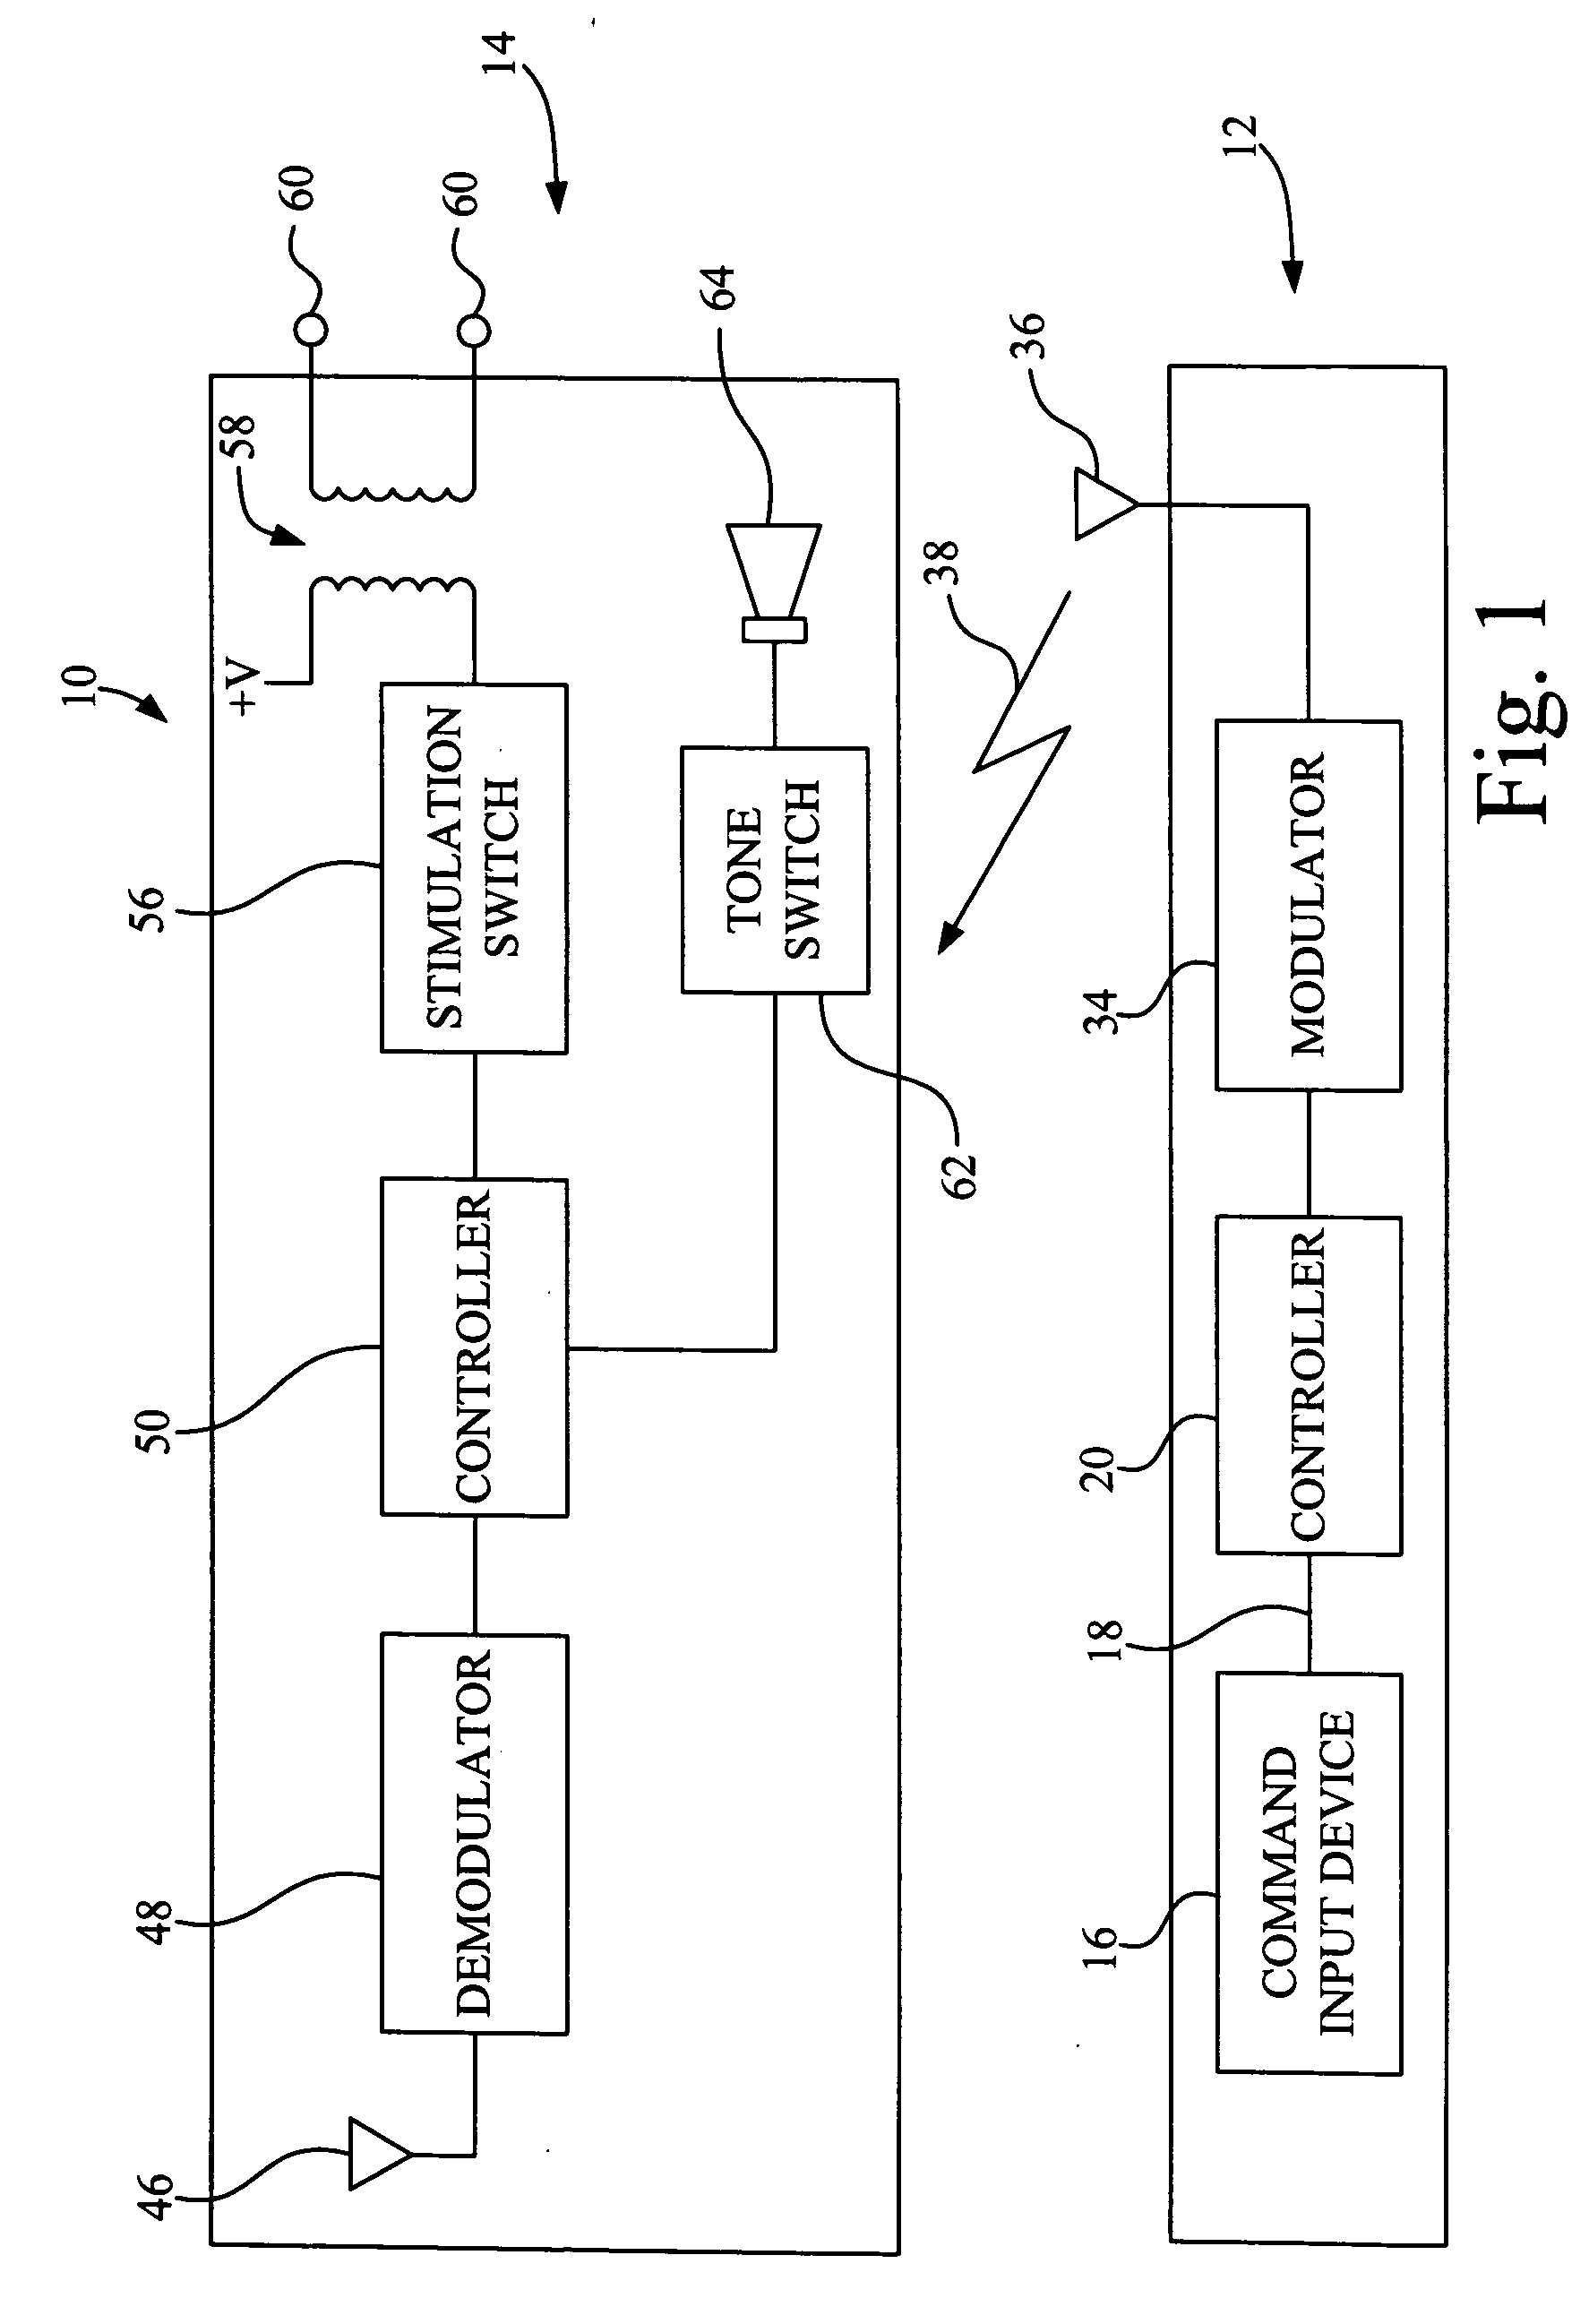 Signal and protocol for remote dog trainer signaling with forward error correction